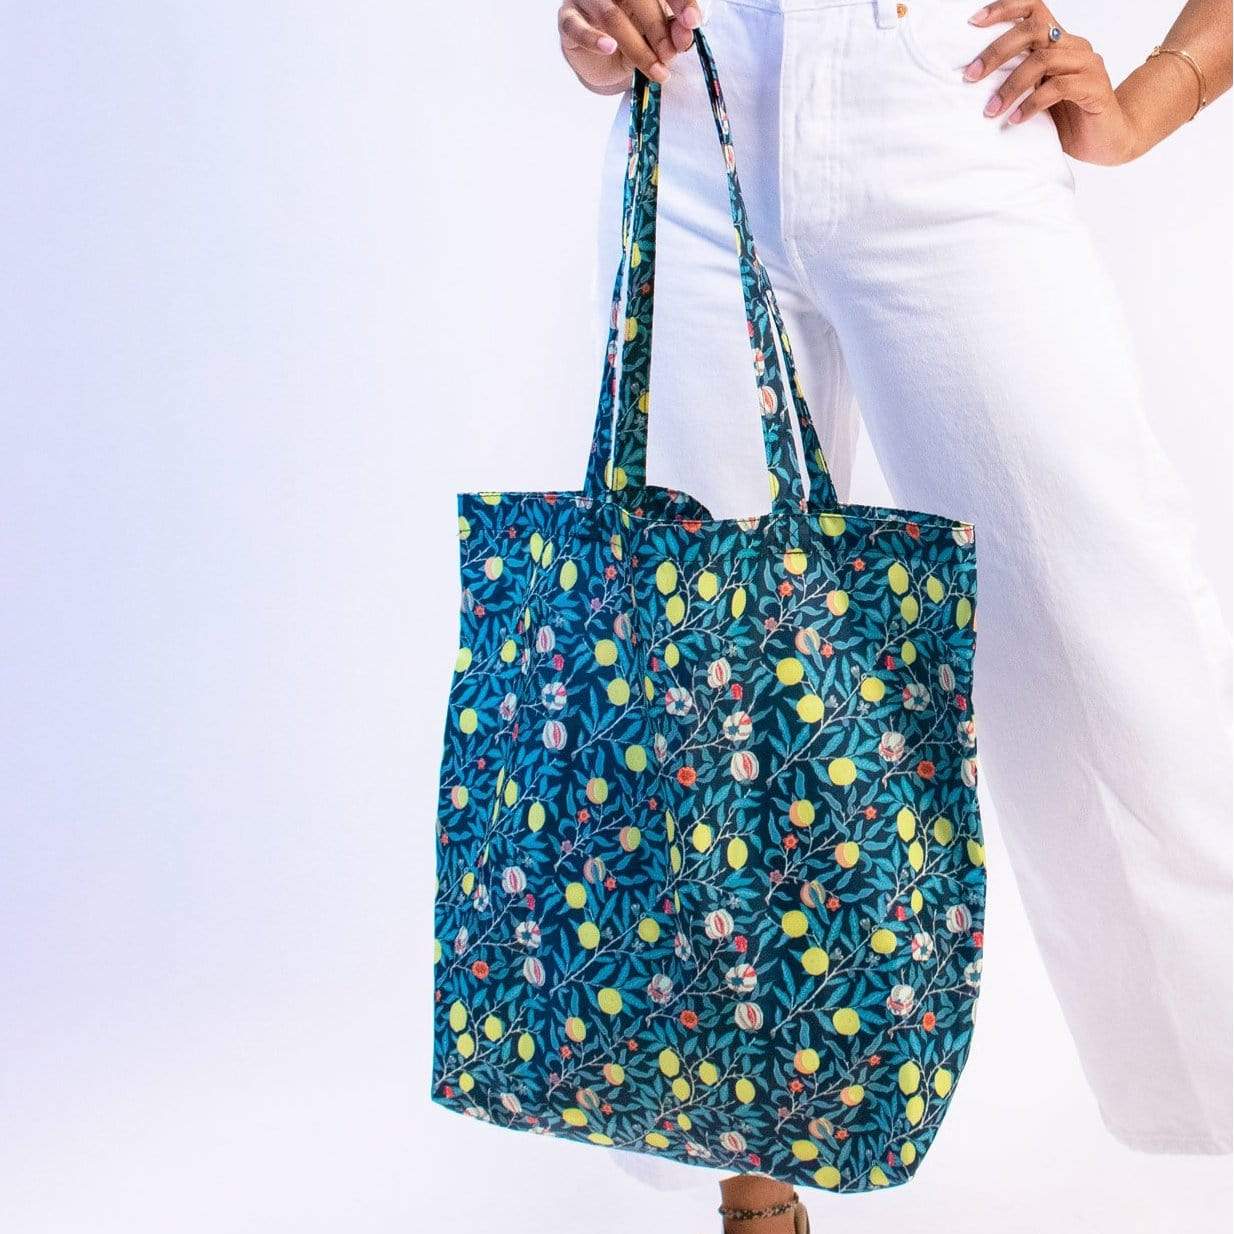 Load image into Gallery viewer, Kind Bag Shopping Totes Kind Bag Reusable Tote Bag - Made from 18 Plastic Bottles (100% rPET)
